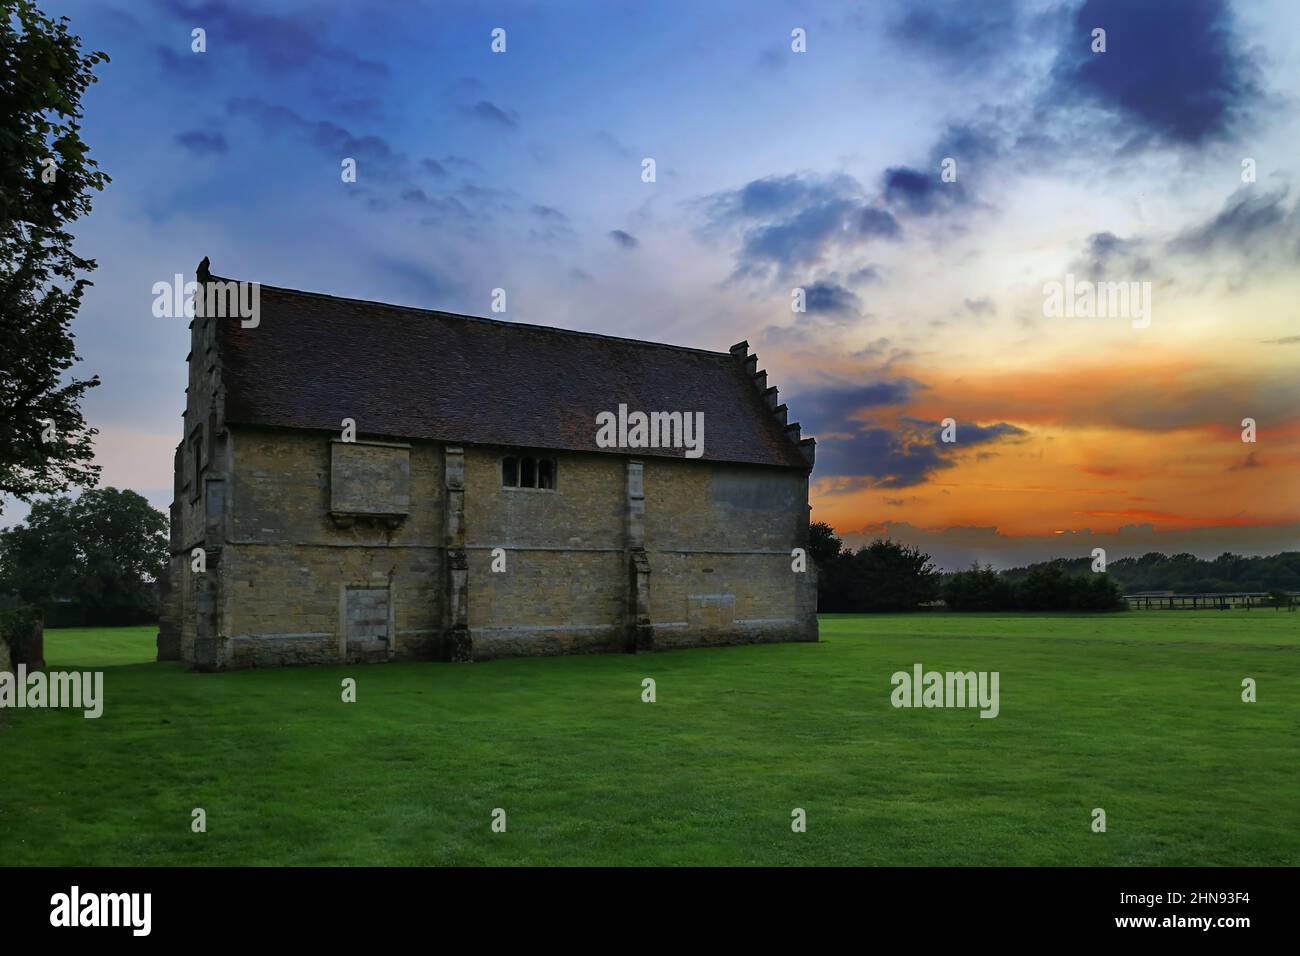 The stables at Sunset, Willington, Bedfordshire, Angleterre, Royaume-Uni Banque D'Images